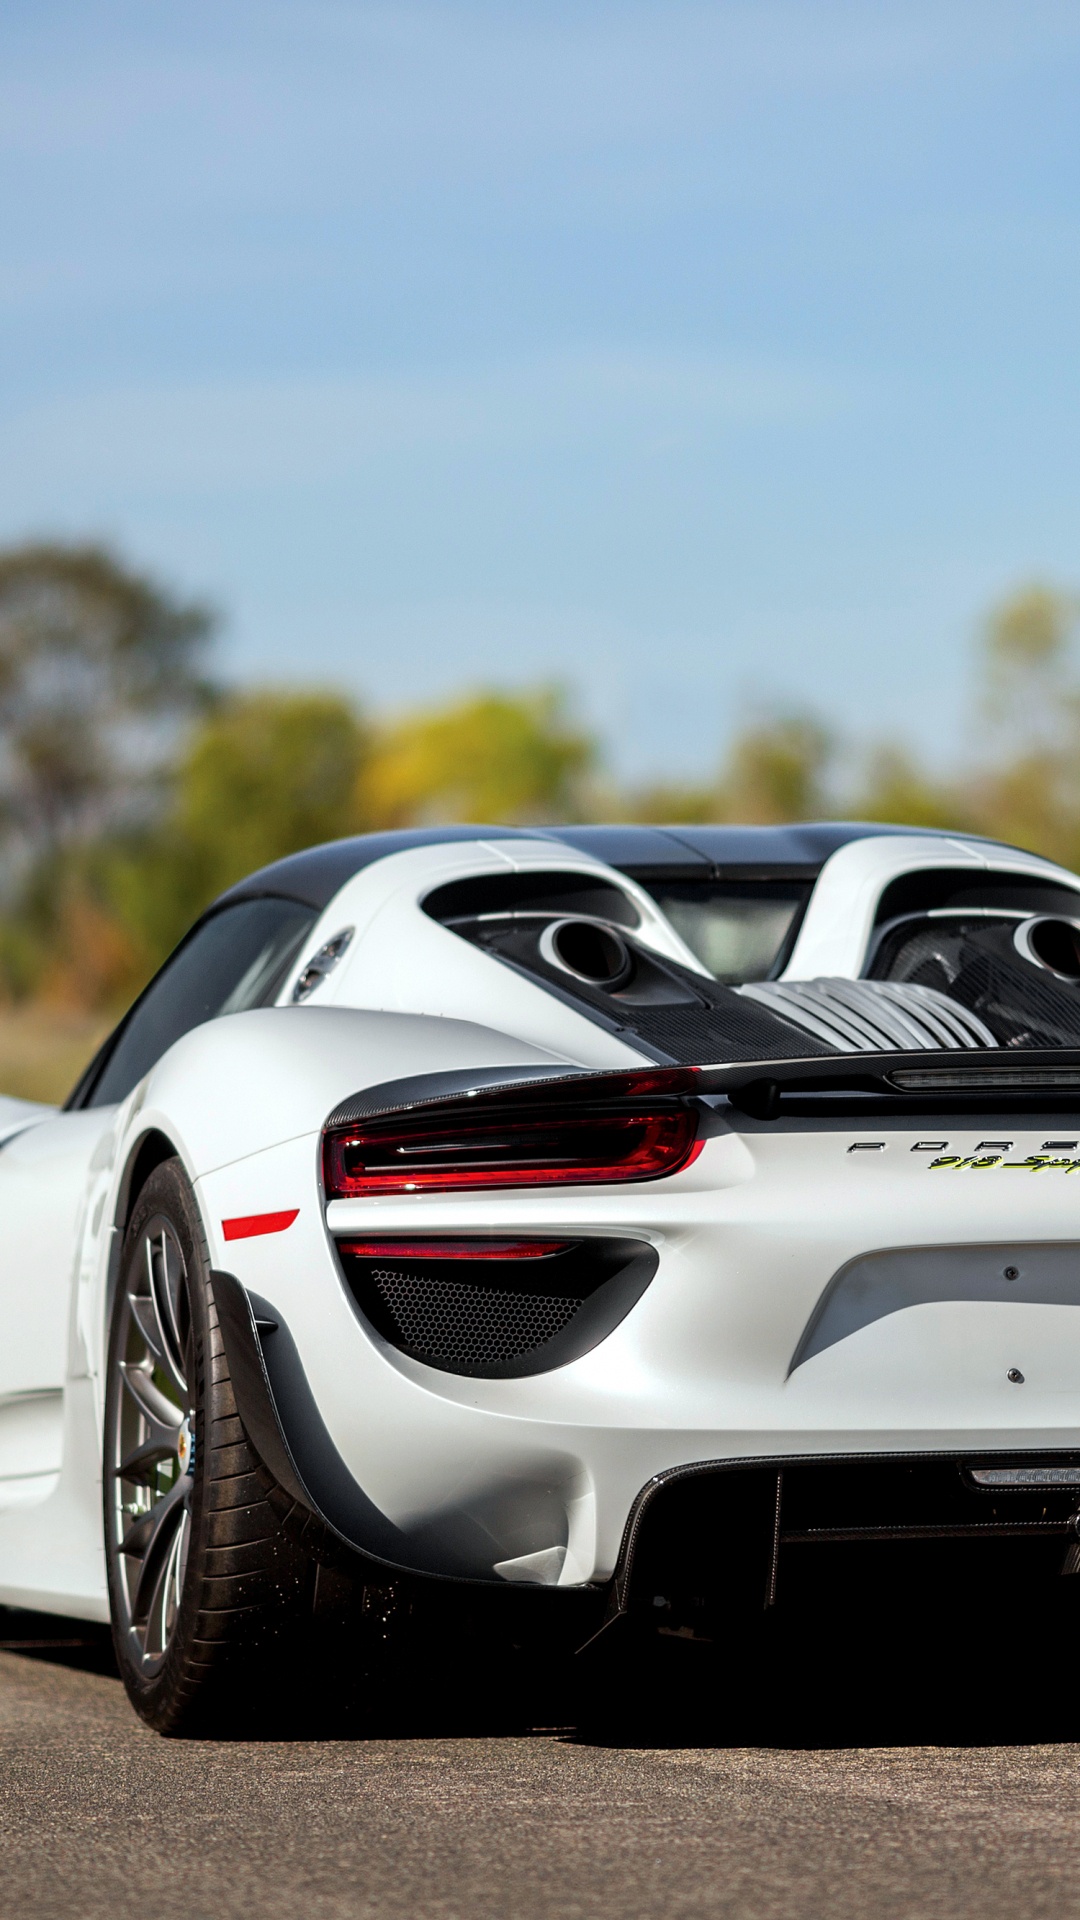 6 amazing cars phone wallpapers  Cool Wallpapers  heroscreencc  Porsche  918 Porsche cars Amazing cars